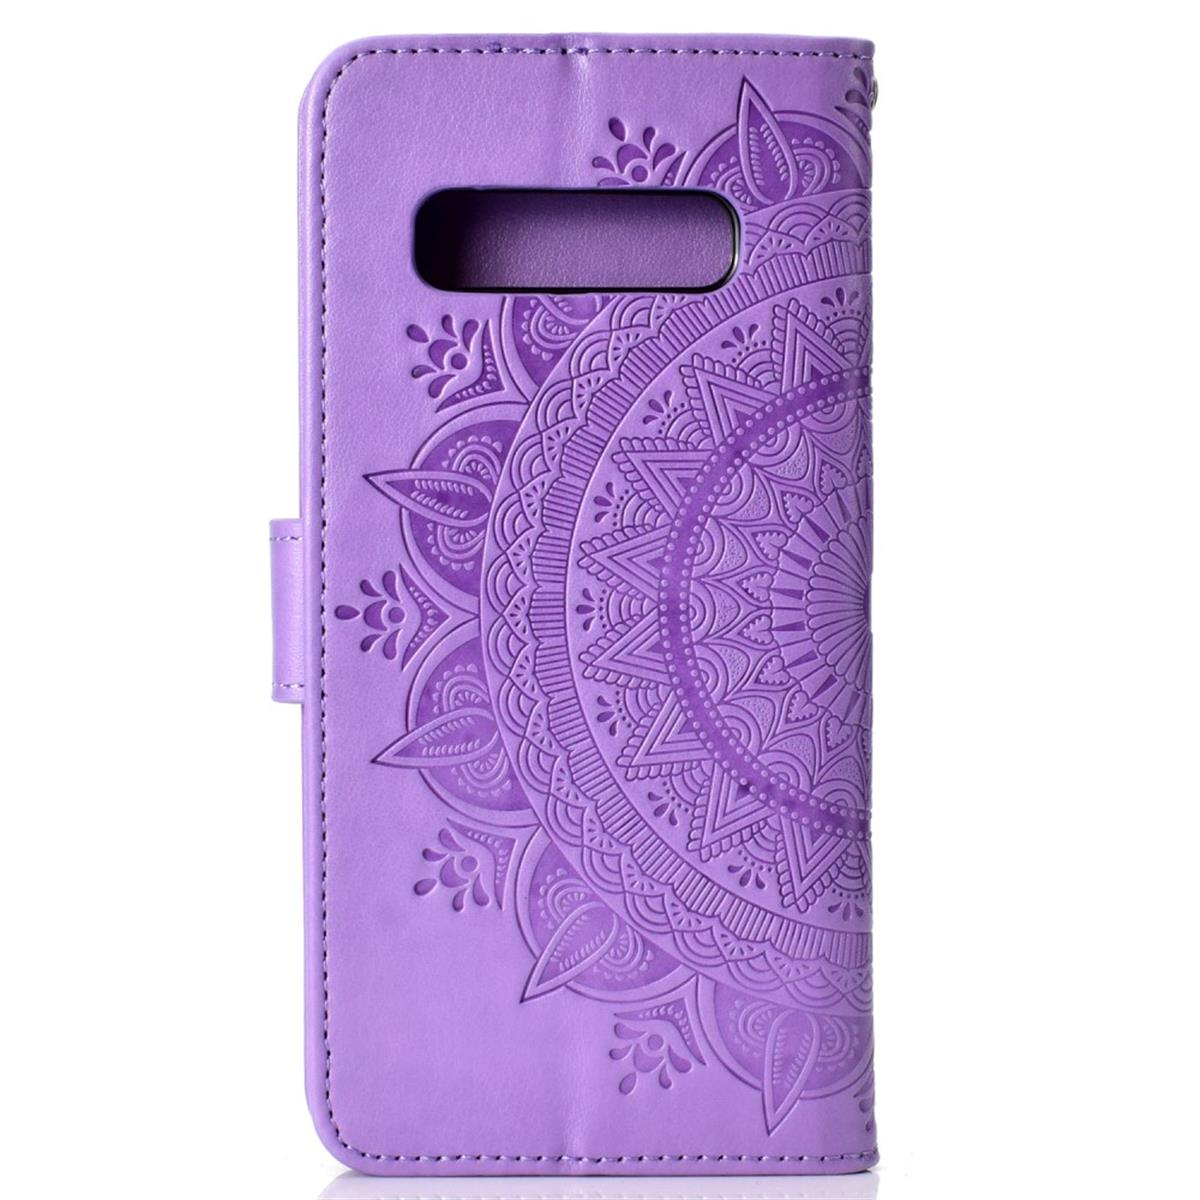 COVERKINGZ Klapphülle mit Mandala Muster, Samsung, Lila S10, Bookcover, Galaxy